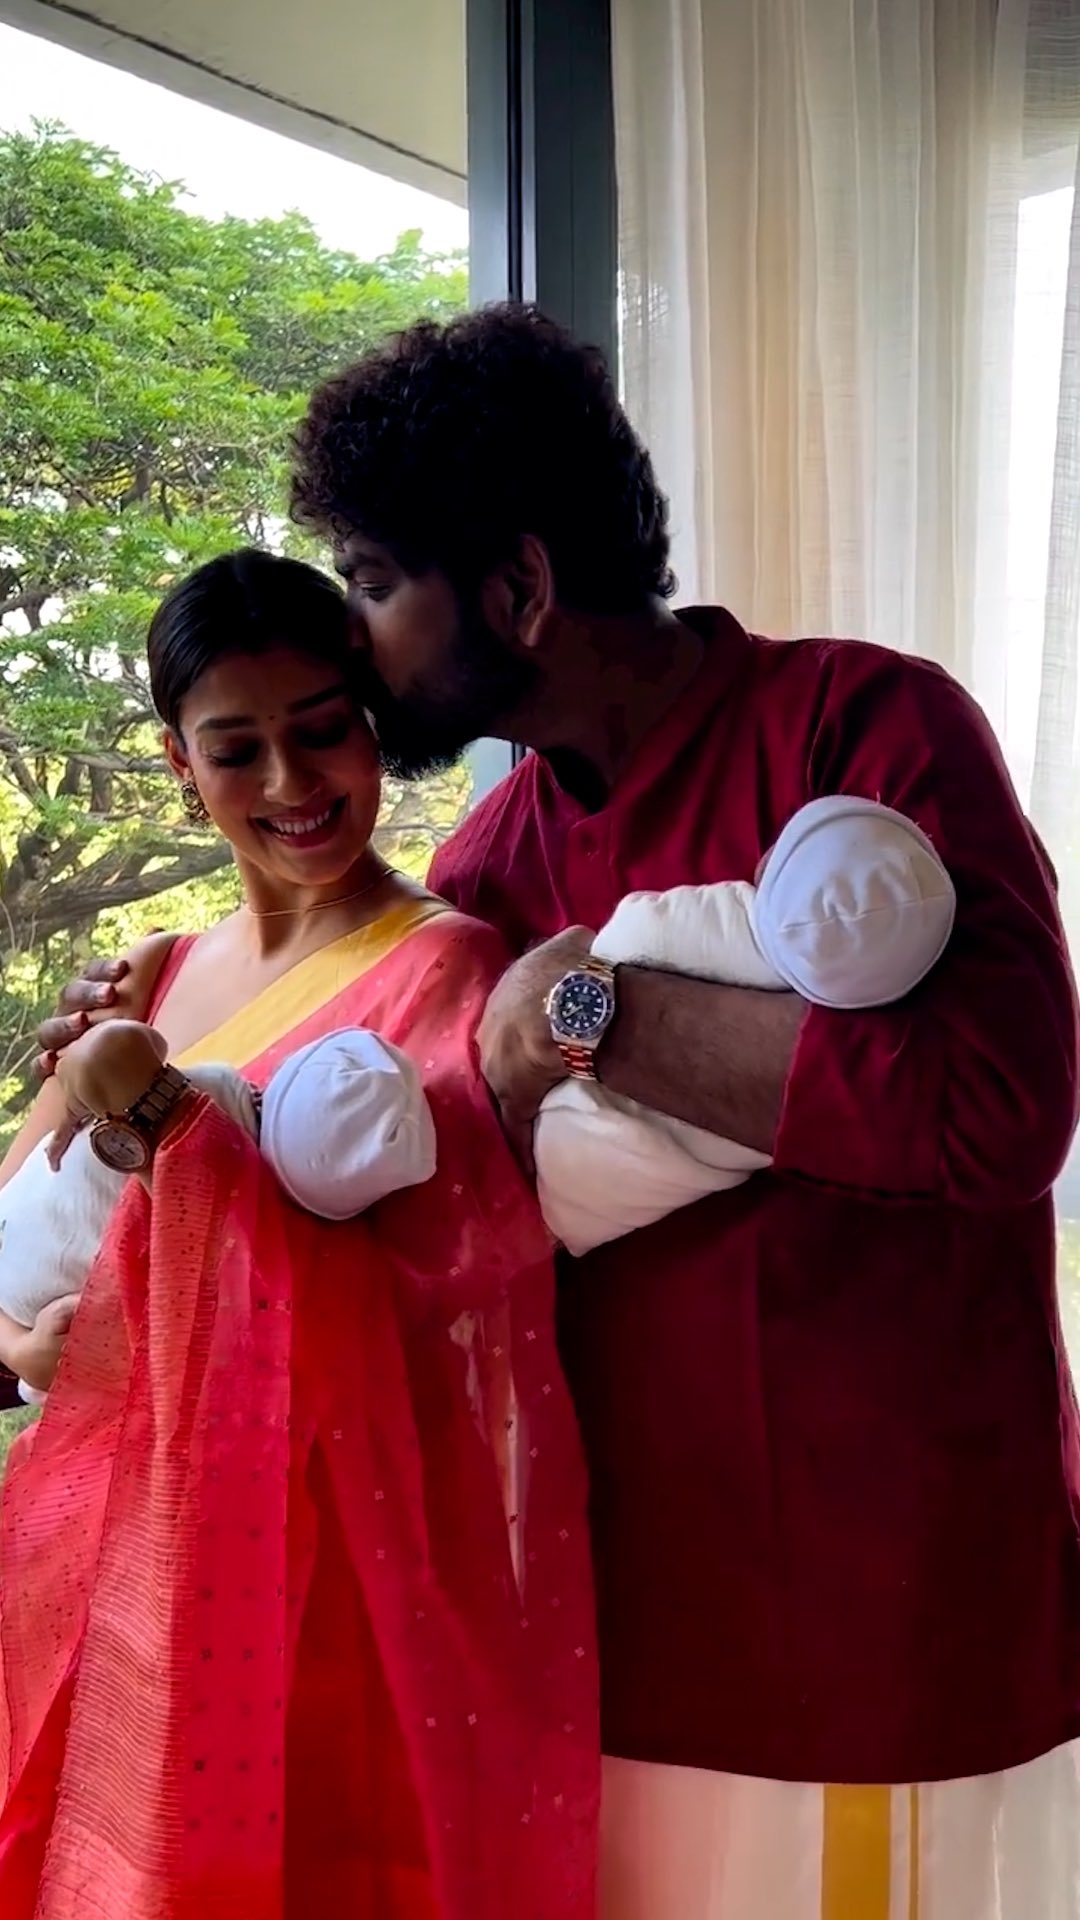 vignesh shivan speaks about twin babies in interview for the first time